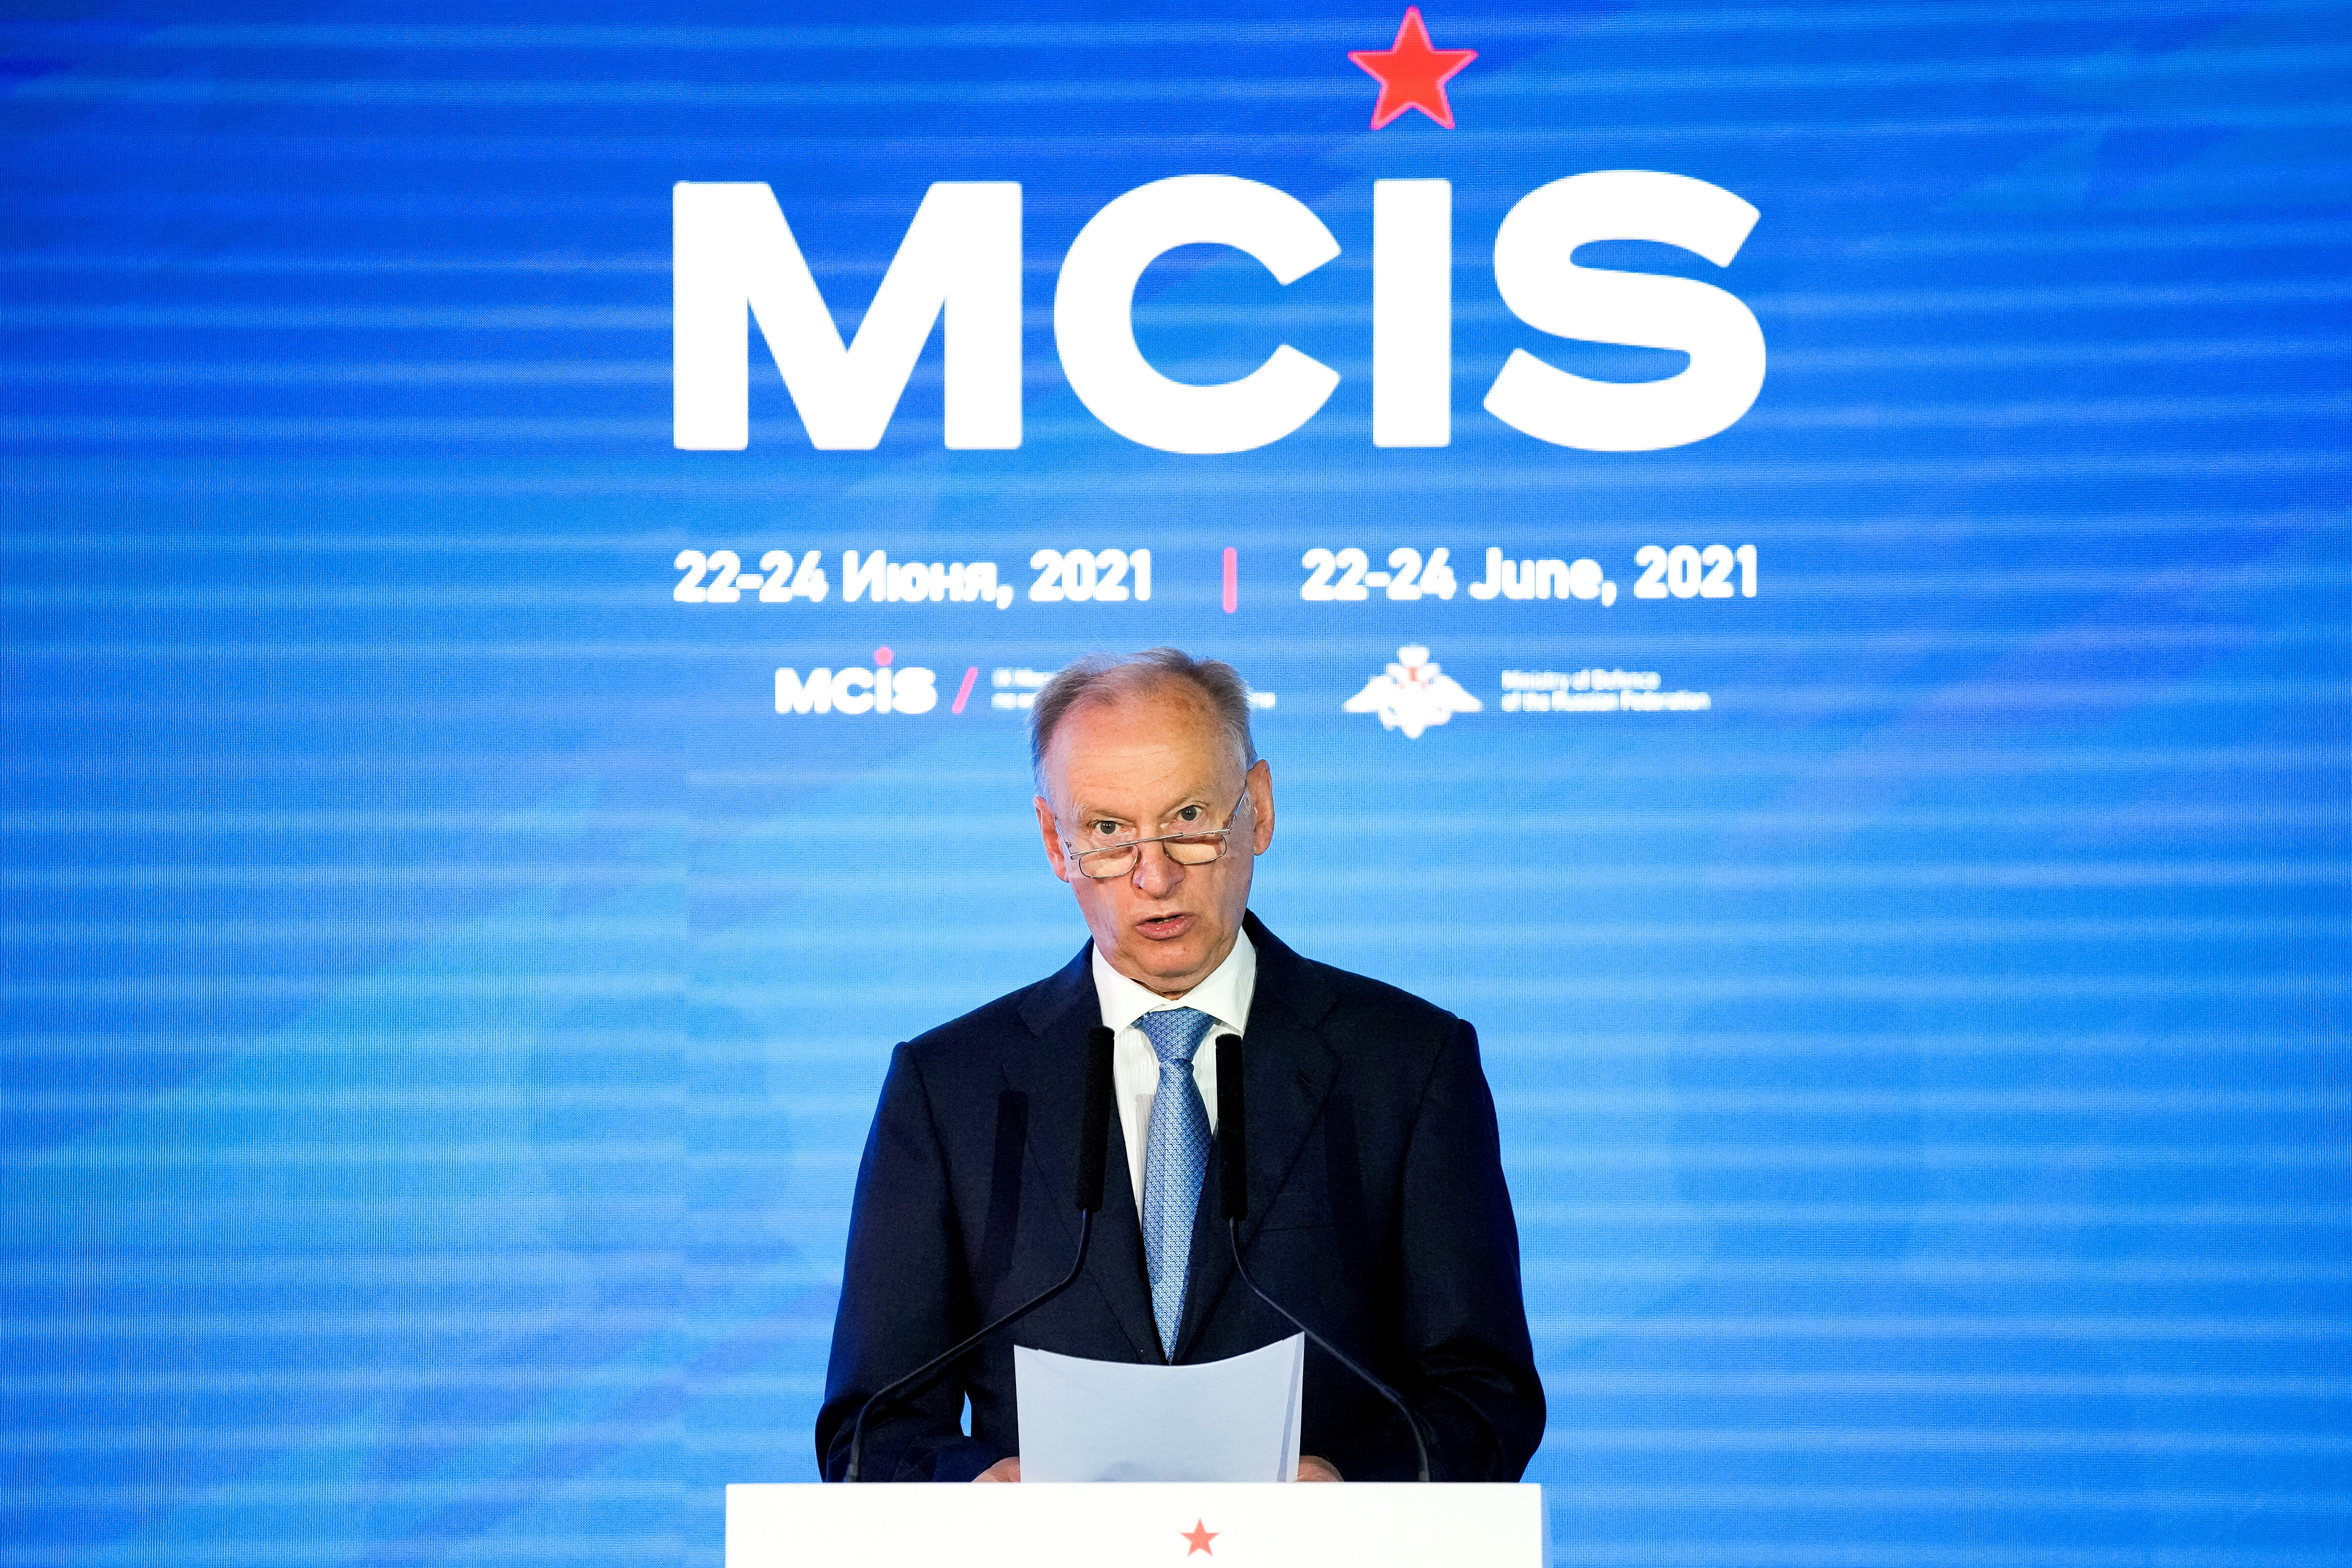 Russia's security council secretary Patrushev delivers his speech at the IX Moscow conference on international security in Moscow